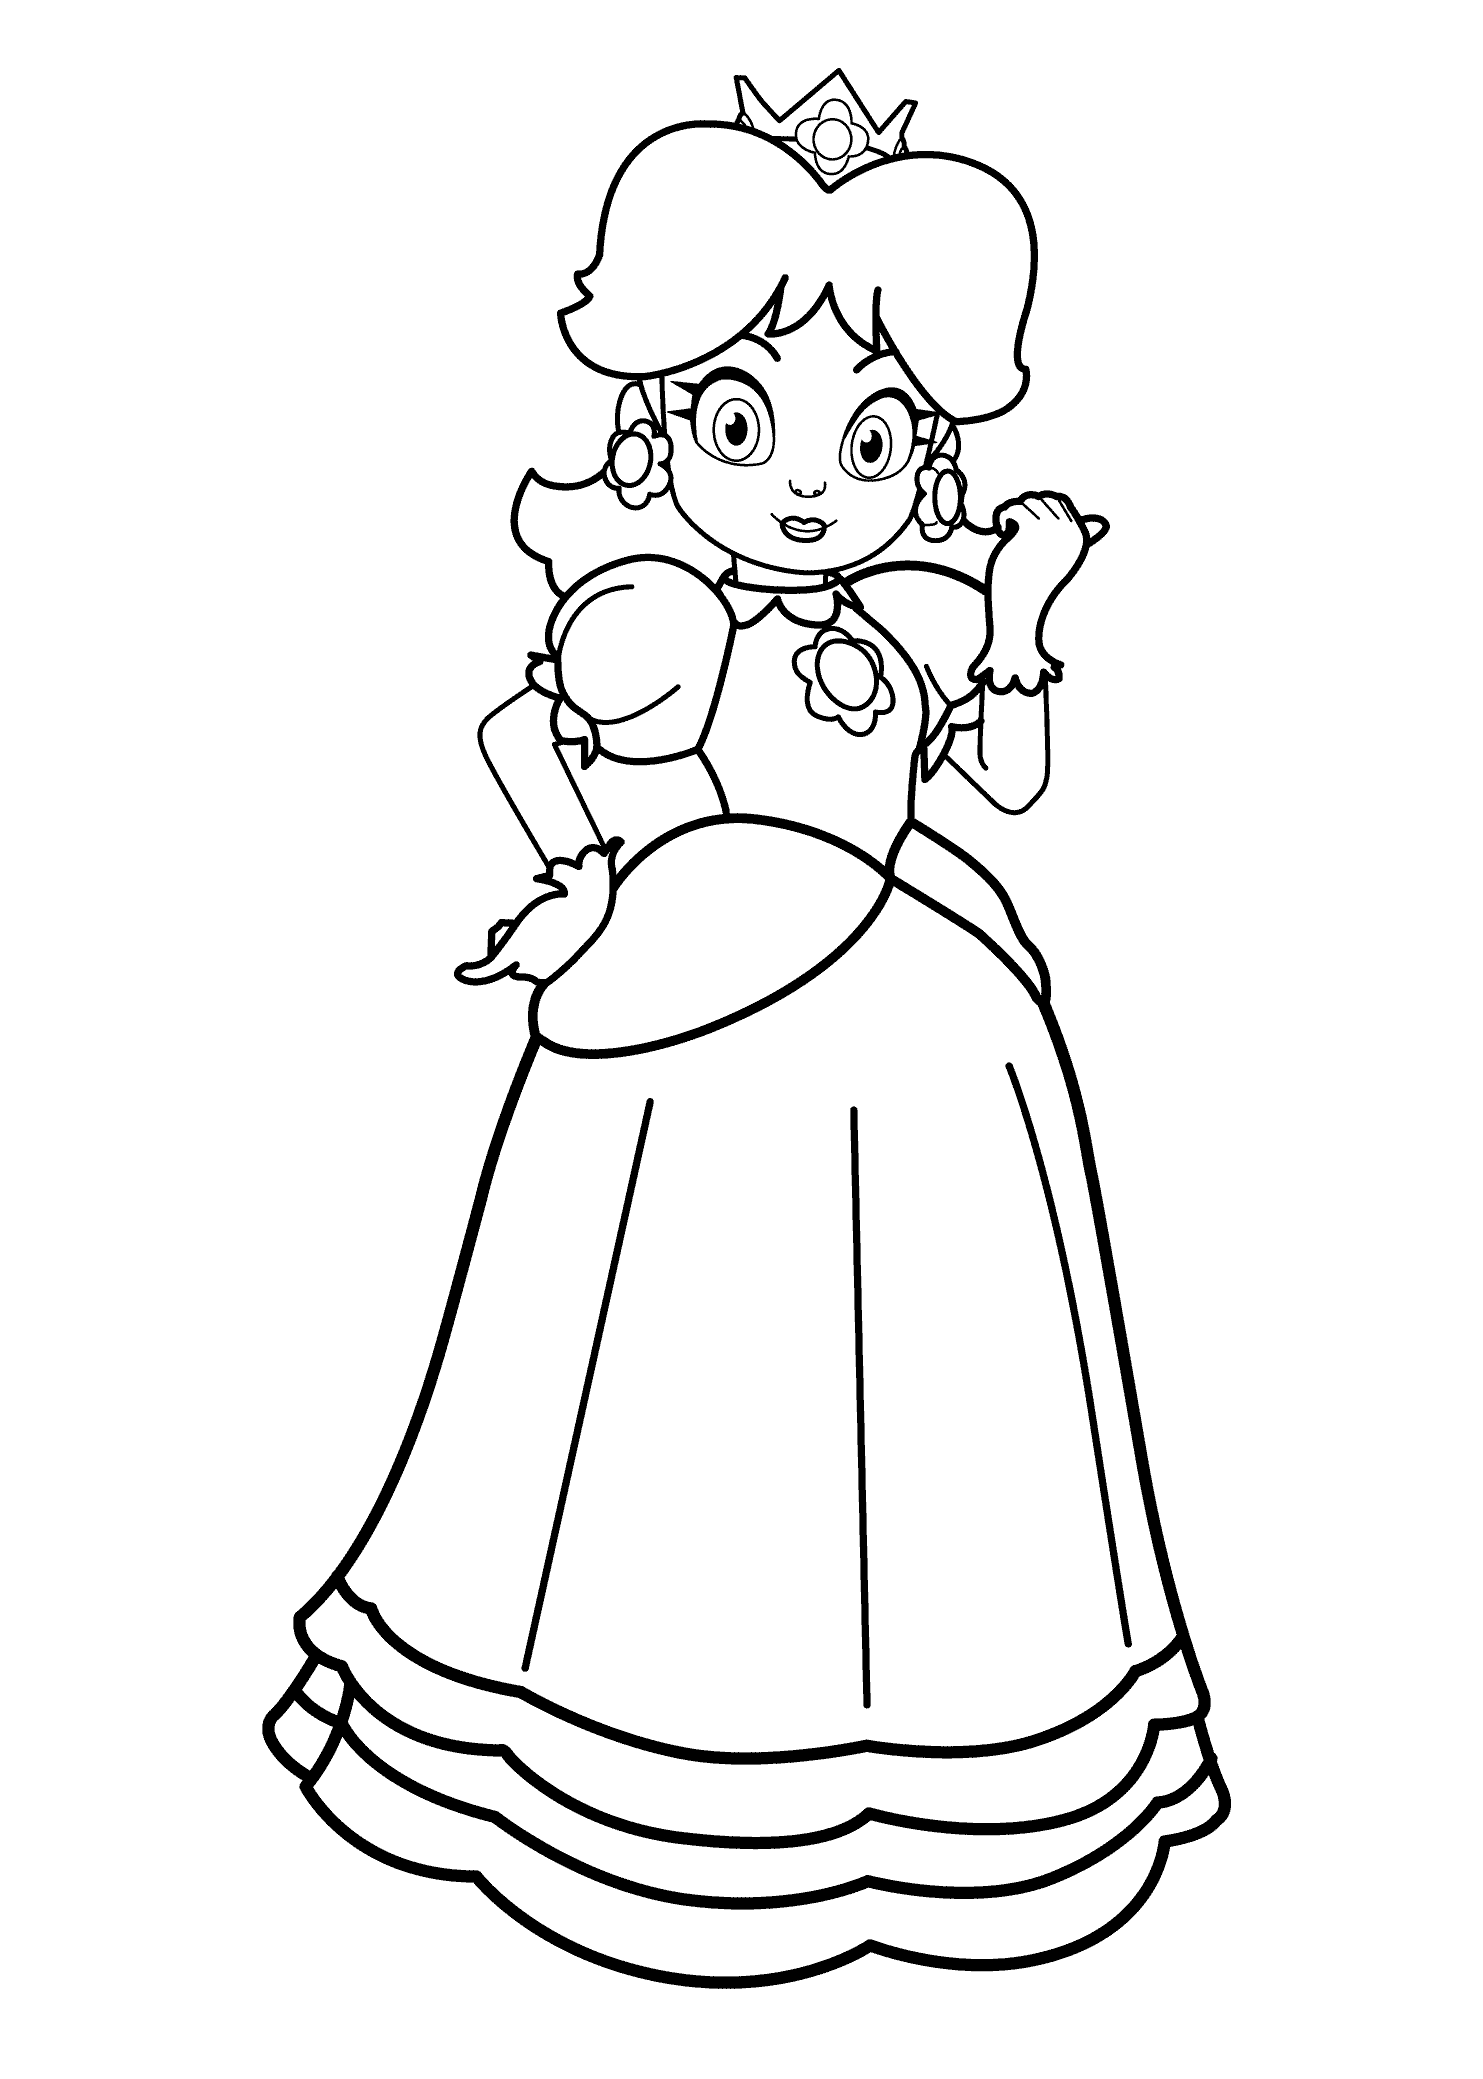 Download Super Mario Daisy Coloring Pages - Coloring Home